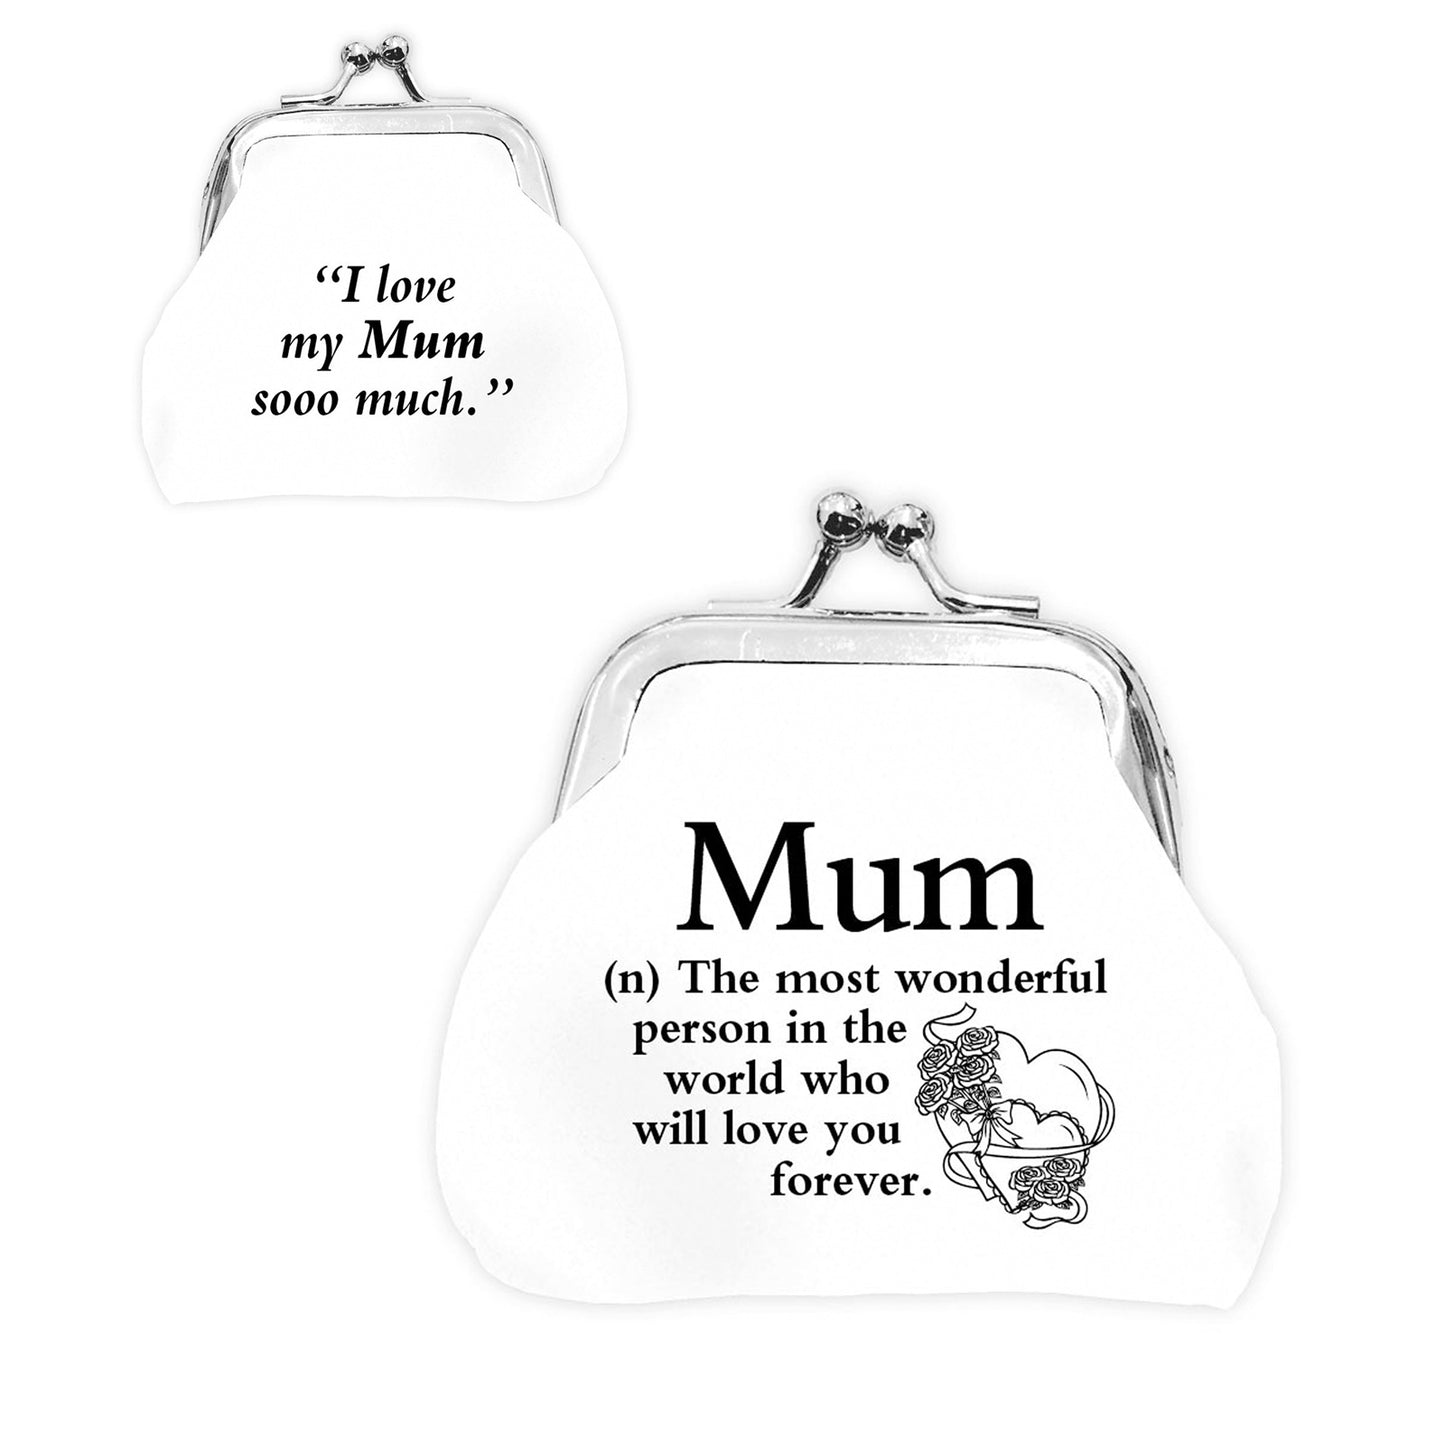 Urban Words Mini Clip Purse "Mum" with urban Meaning